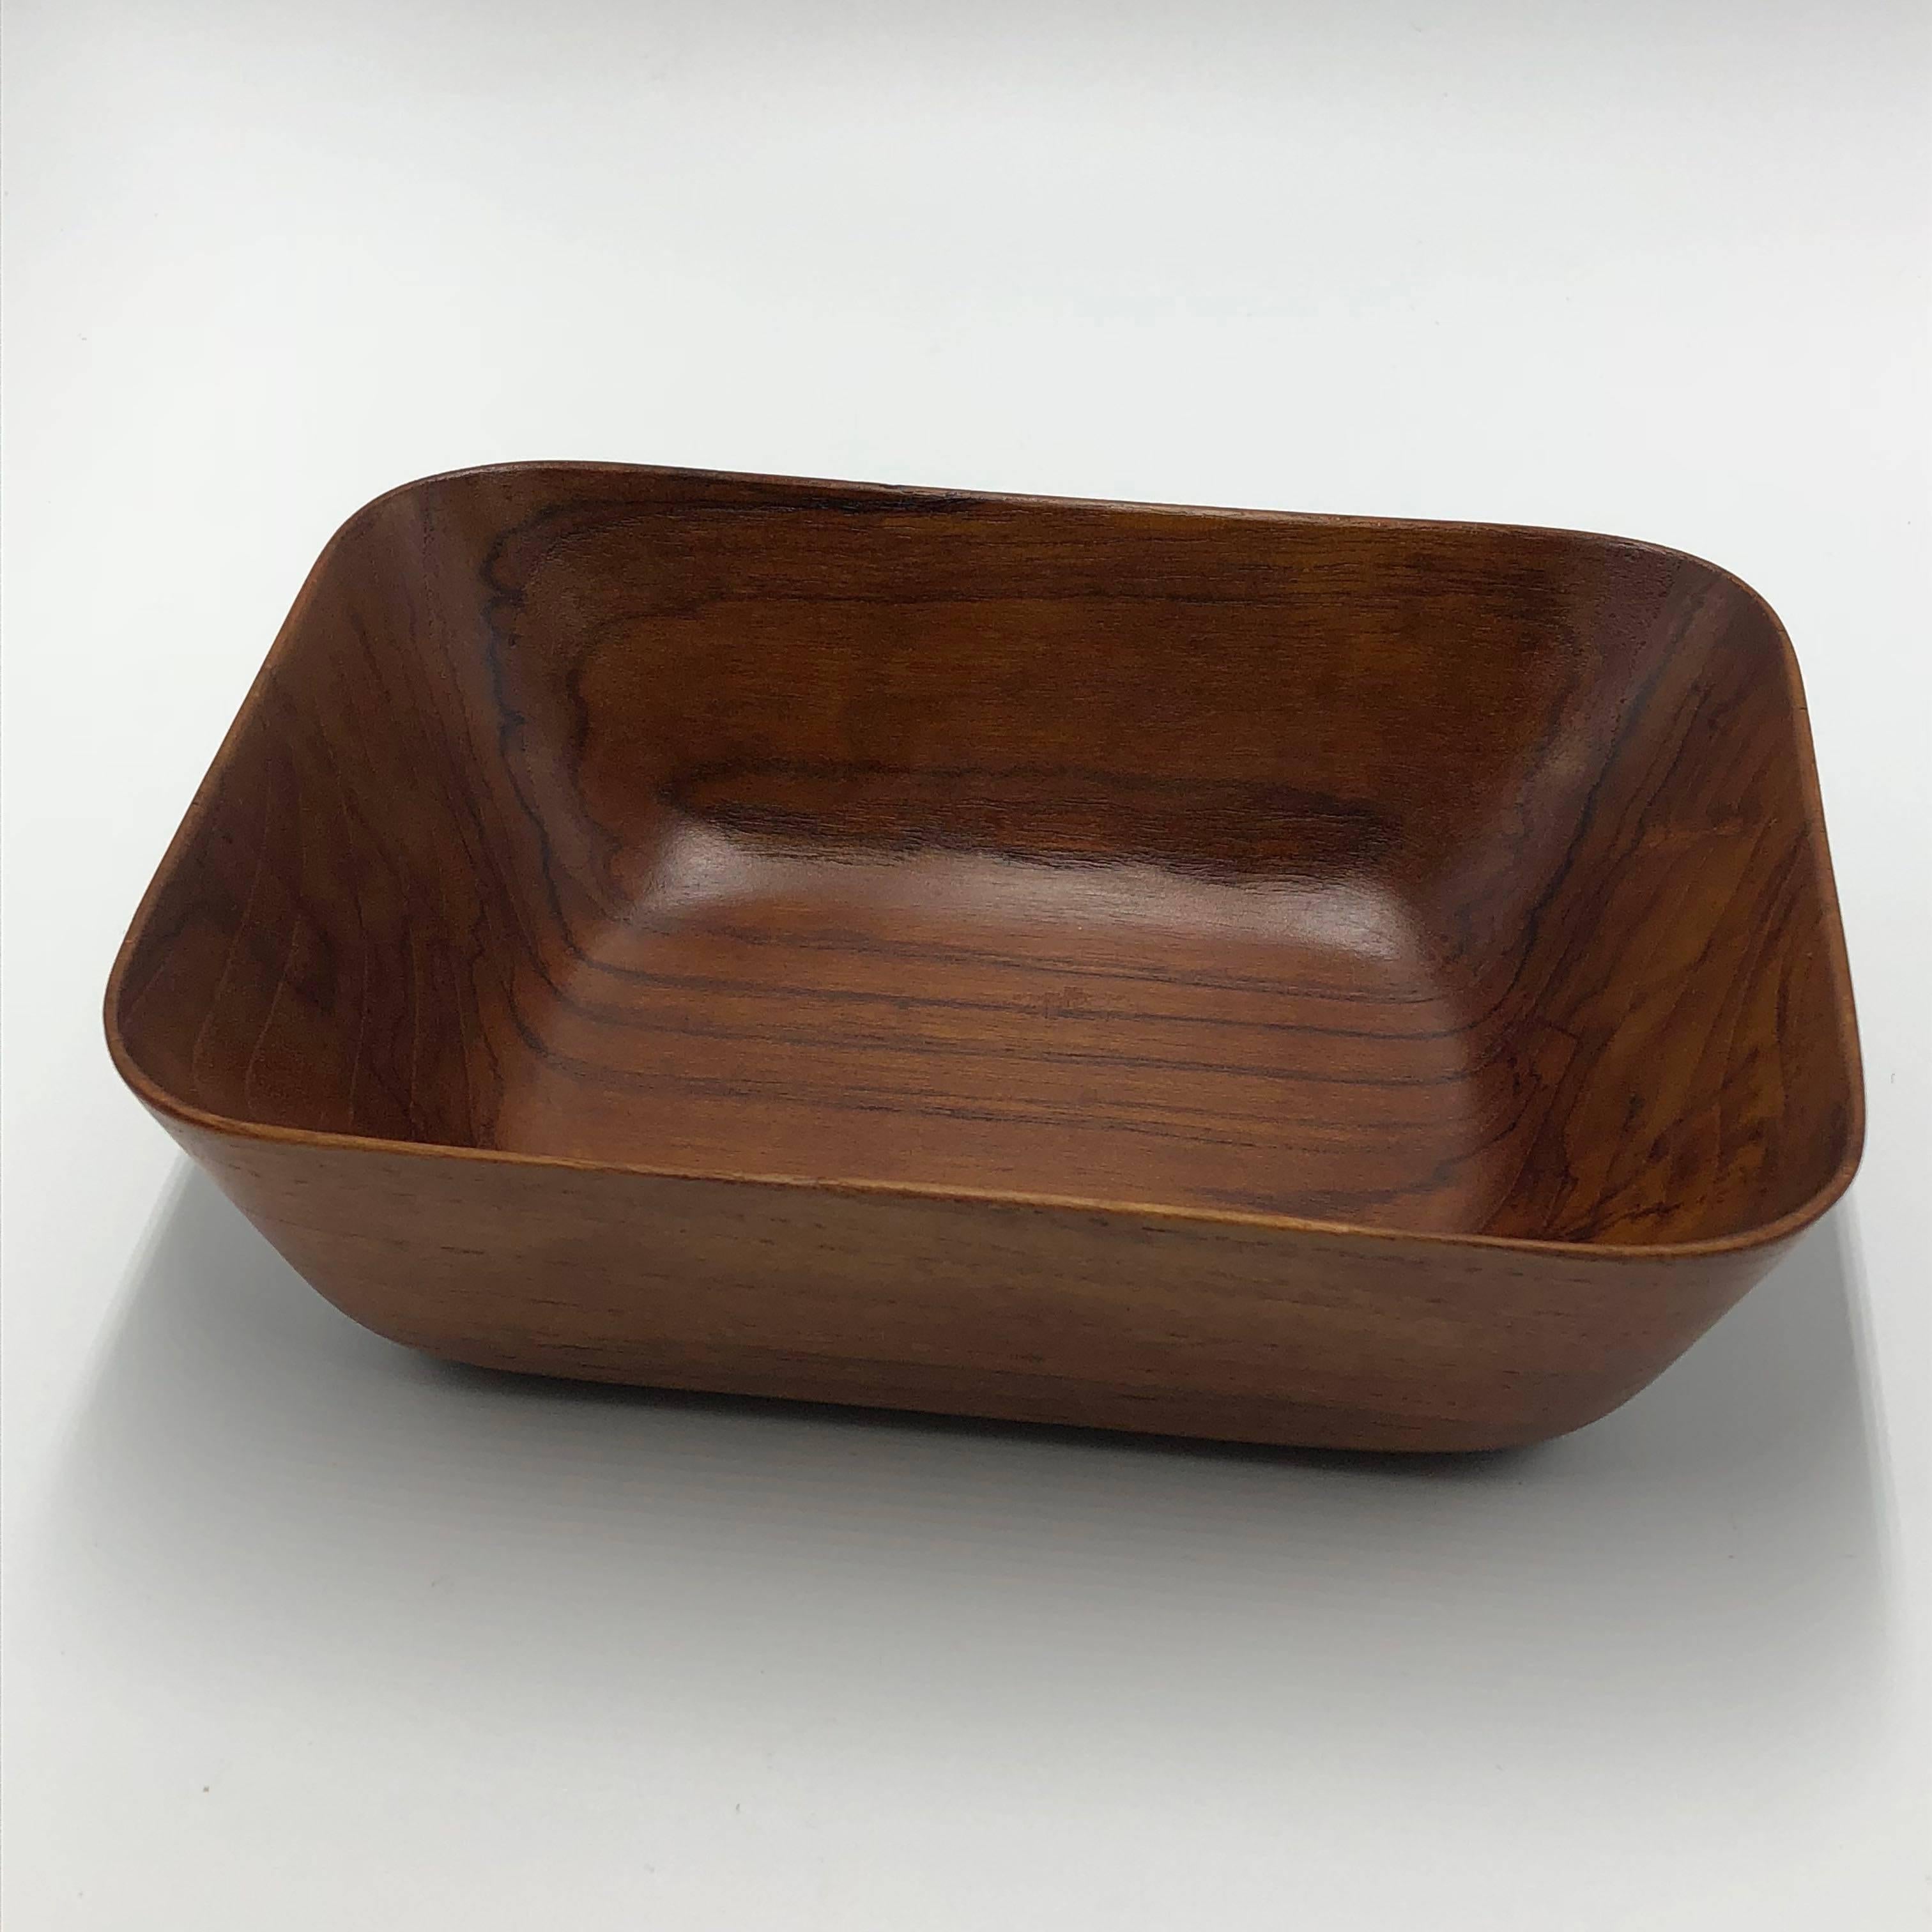 Danish teak bowl in original/ very good condition.
The bowl was made in Denmark by Digsmed in the 1950s.
Marked on the bottom.